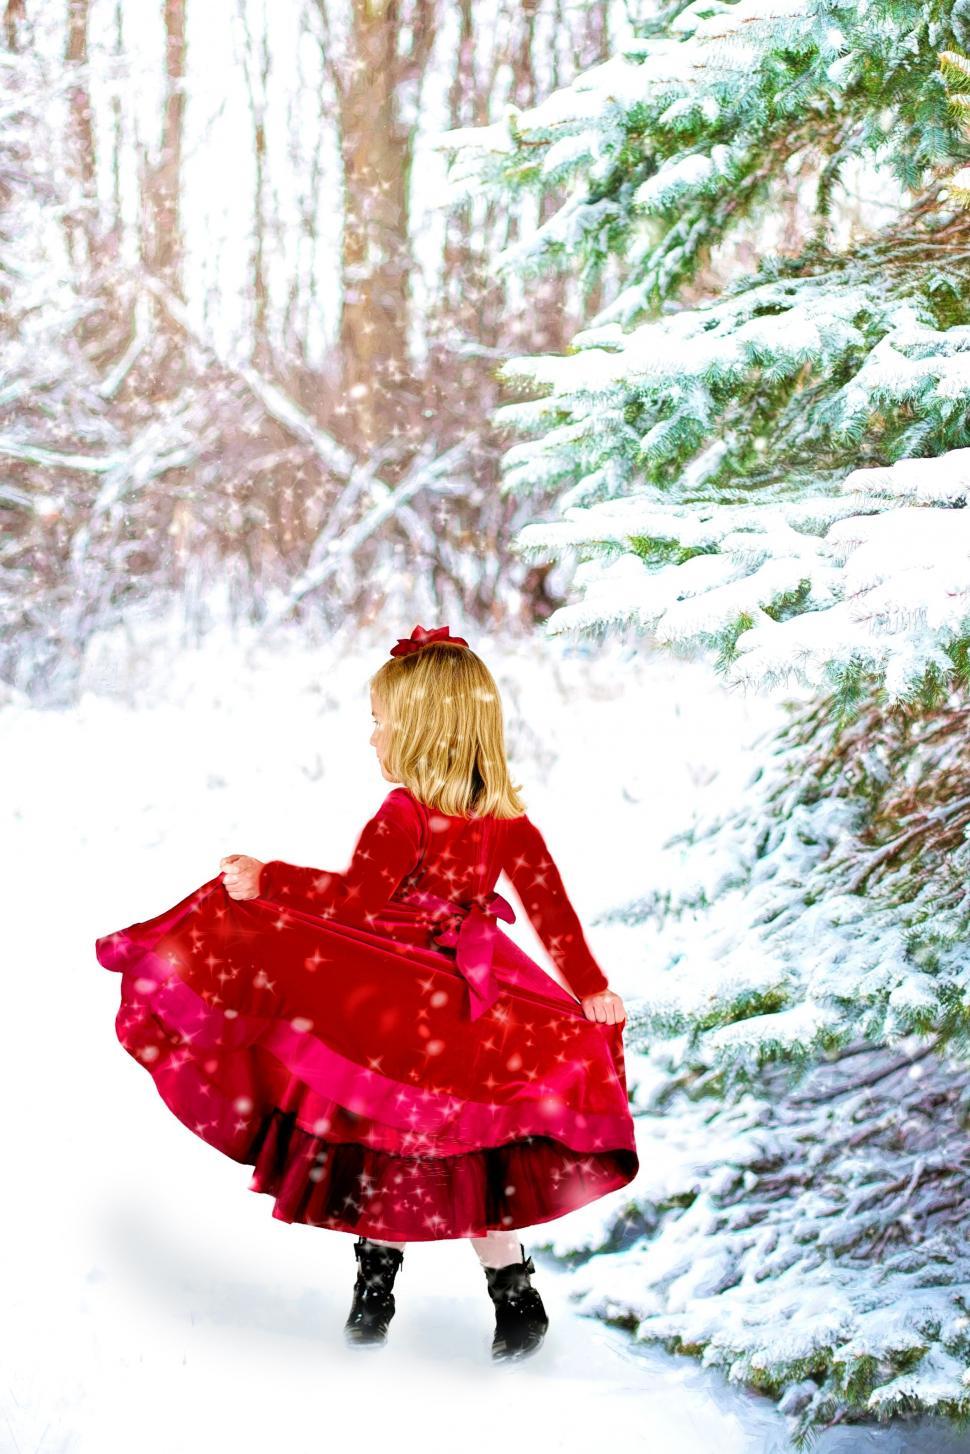 Free Image of Little Girl in Red Dress and Snow  